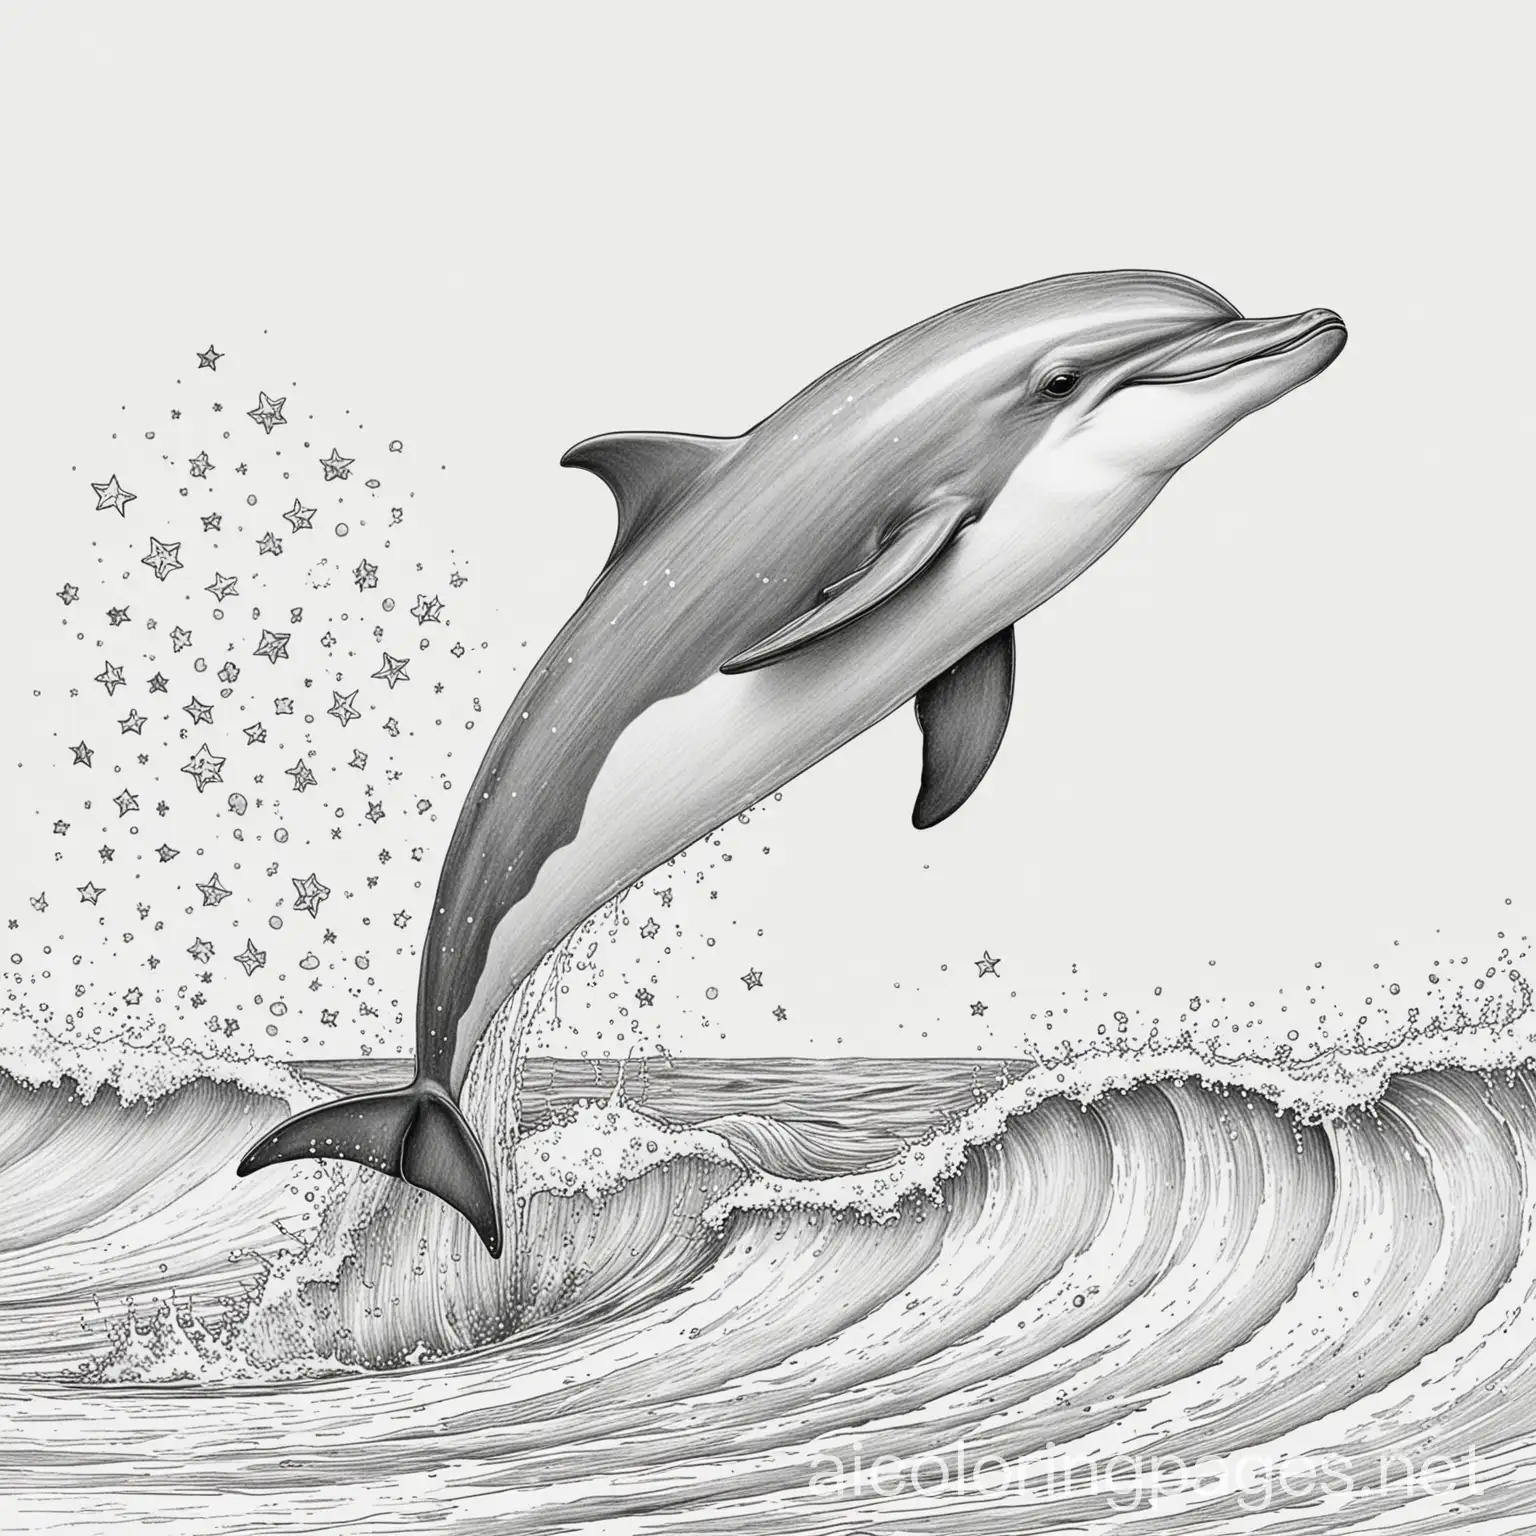 Dolphin - A playful dolphin jumping out of the water, surrounded by waves and little stars, Coloring Page, black and white, line art, white background, Simplicity, Ample White Space. The background of the coloring page is plain white to make it easy for young children to color within the lines. The outlines of all the subjects are easy to distinguish, making it simple for kids to color without too much difficulty